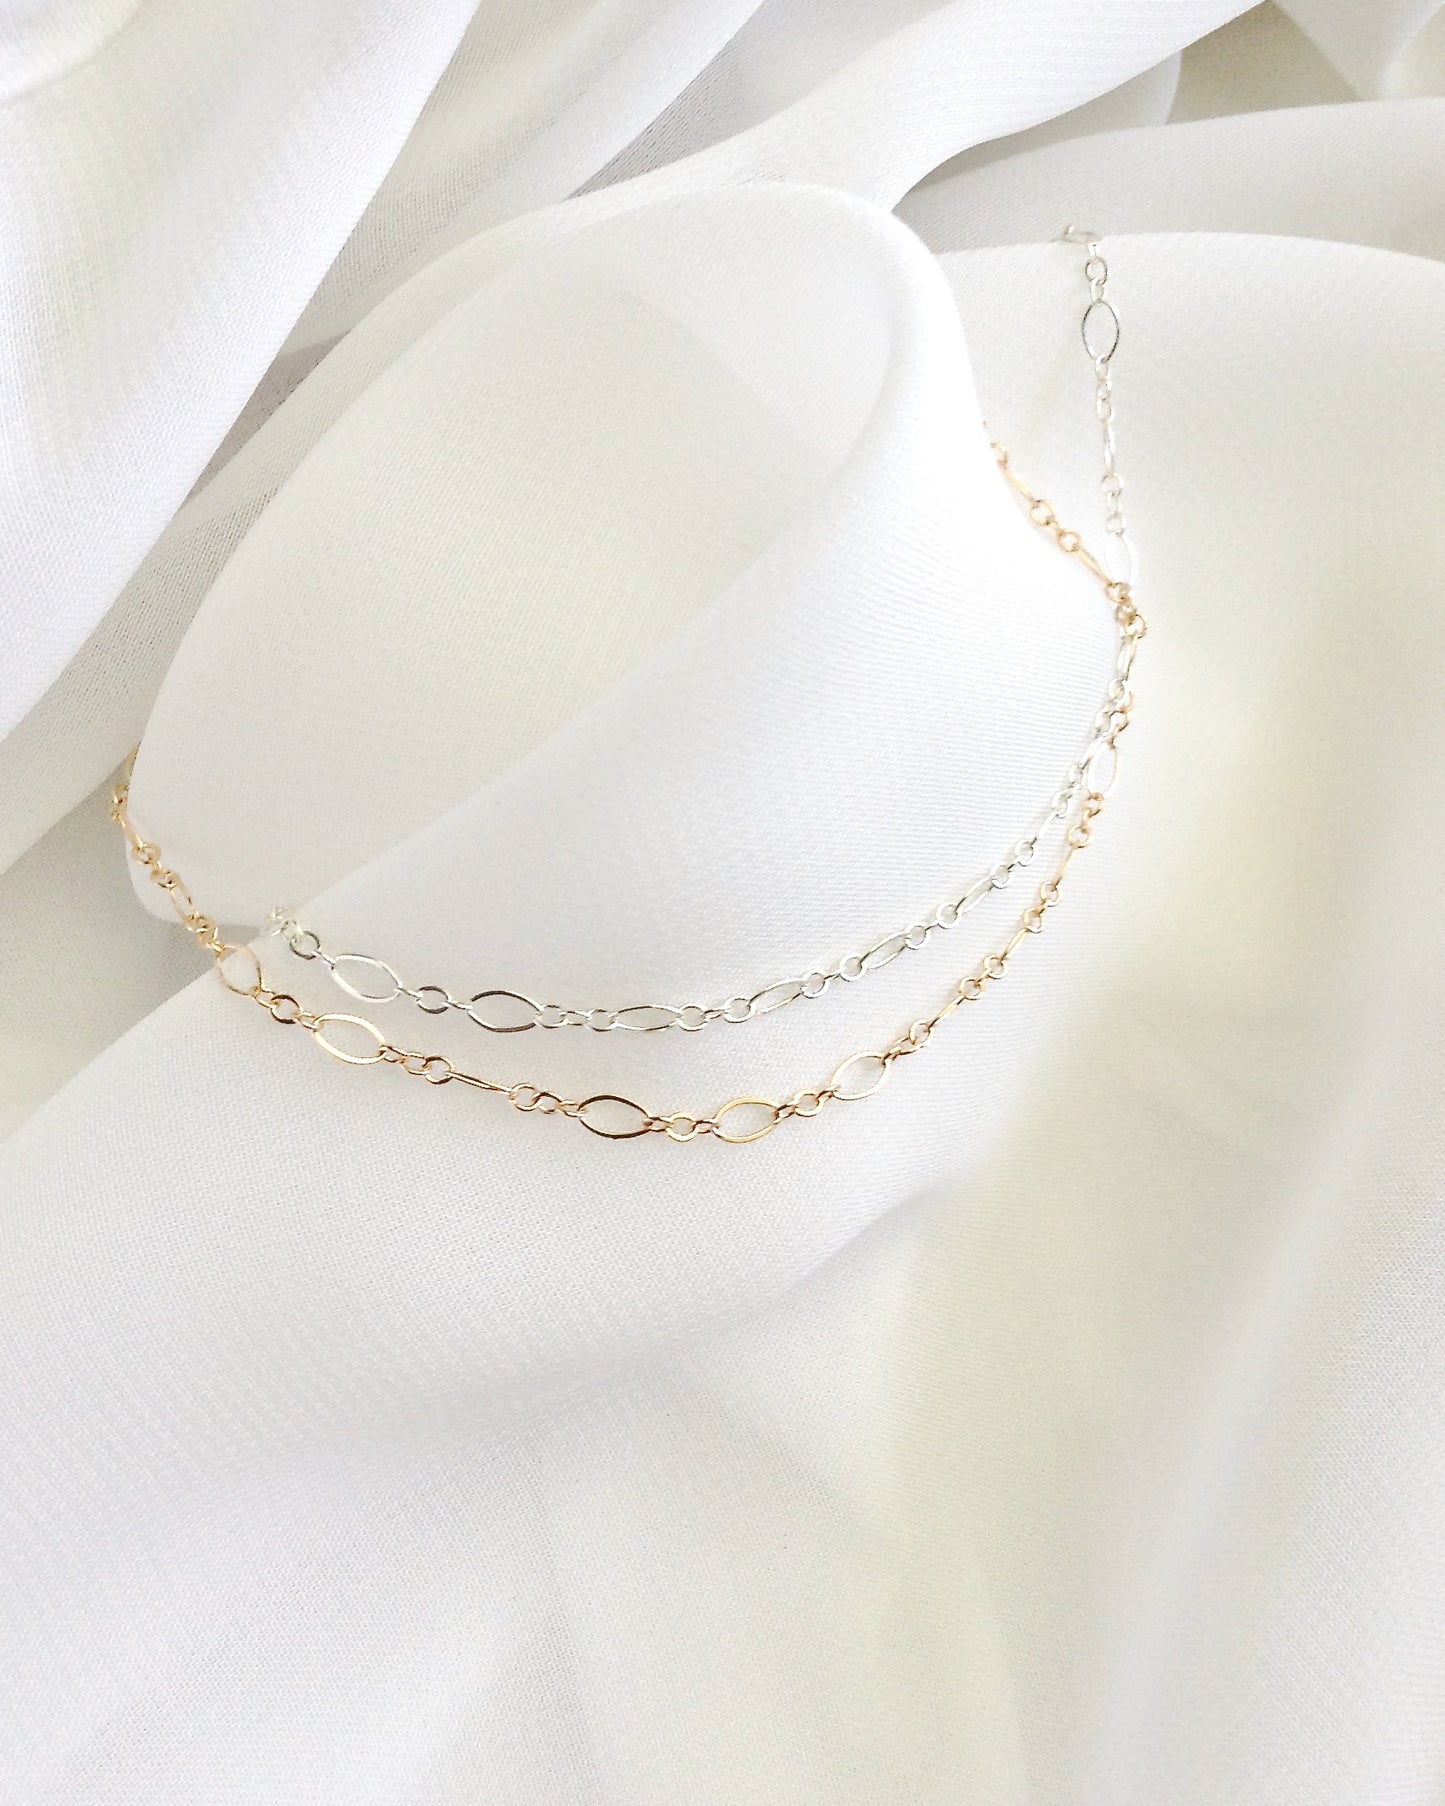 Dainty Anklet in Gold Filled or Sterling Silver | Simple Everyday Classy Anklet | IB Jewelry